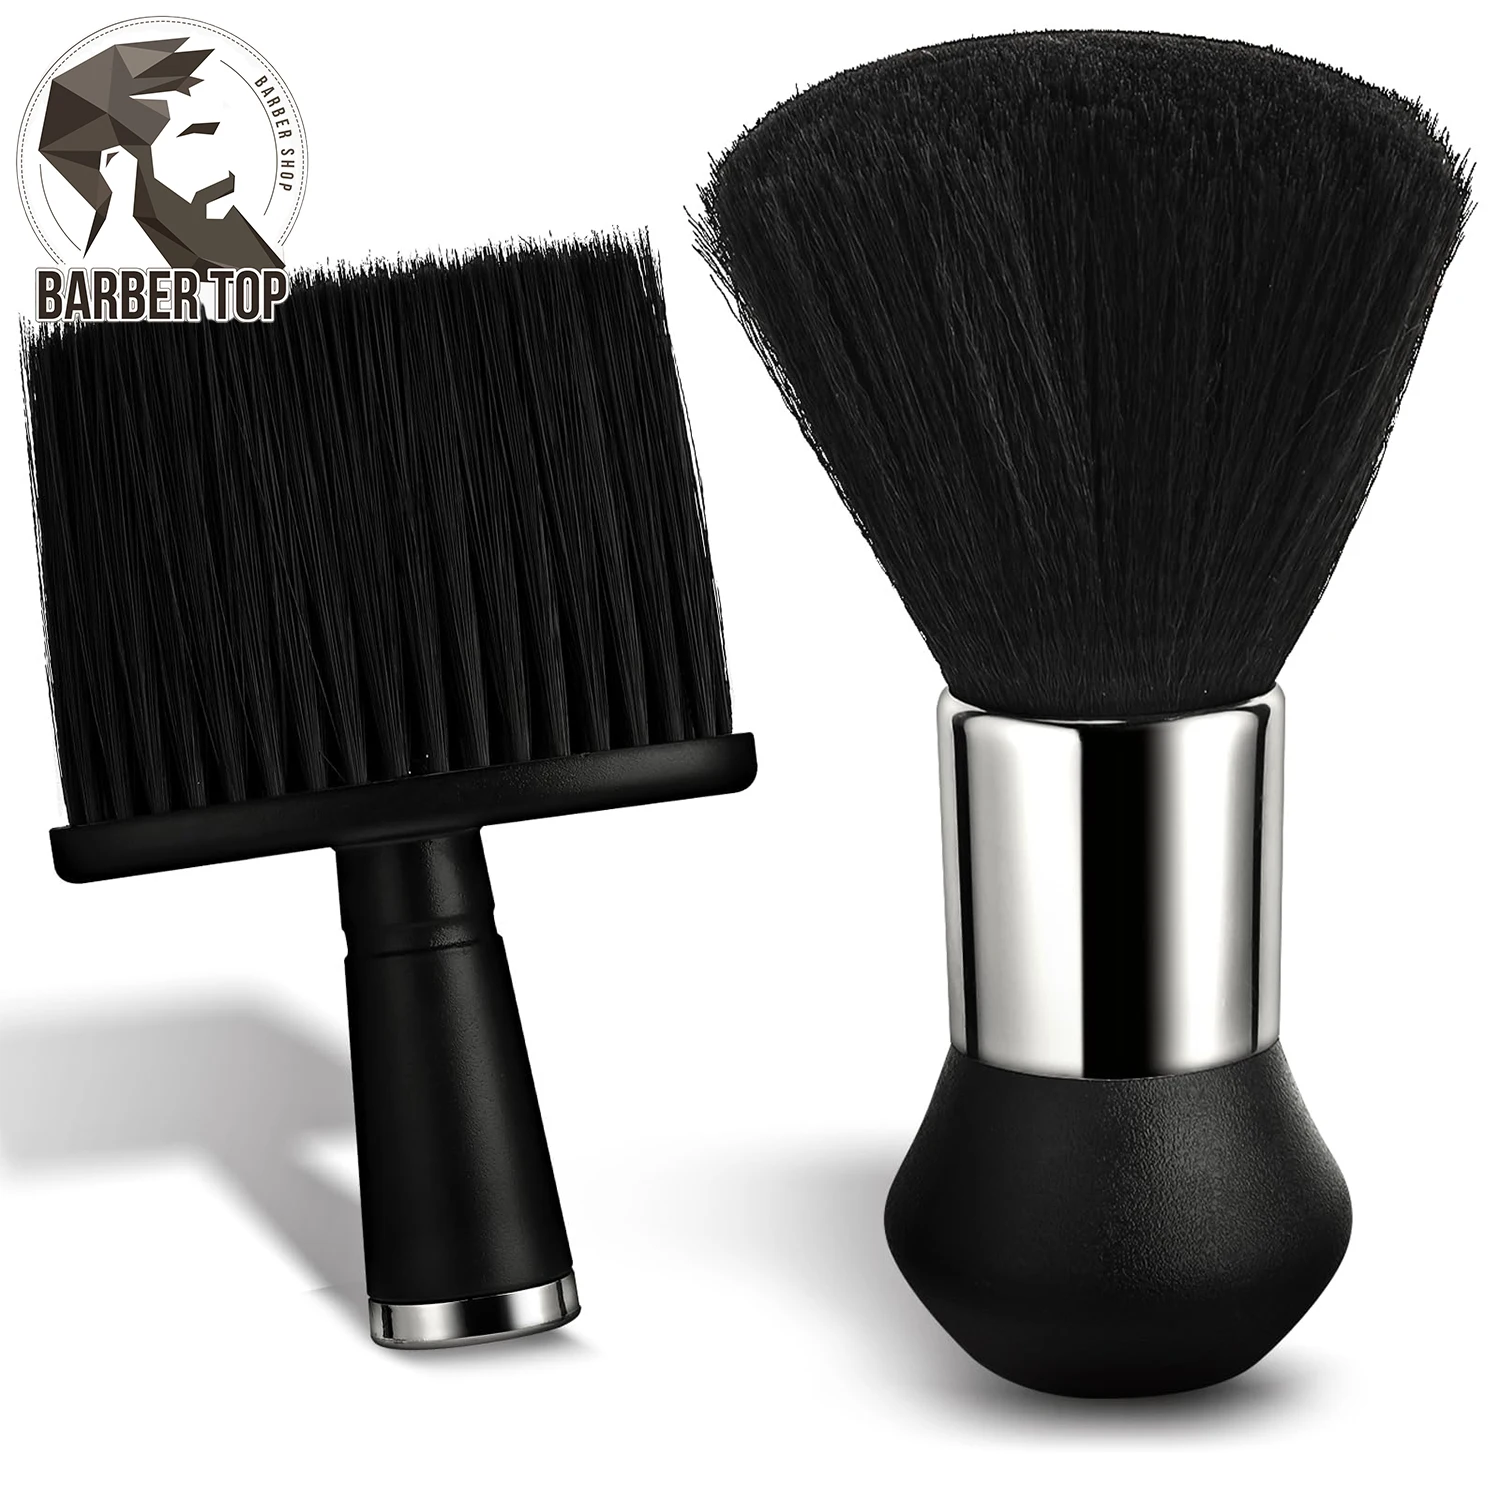 2Pcs Neck Duster Barber Remove Loose Hair Brush Professional Hair Cutting Brush Soft Hair Cleaning Brush Hairdressing Tools 2pcs 10 7 5 3 1cm nature color wooden travel pocket men boy kids professional flat hair brush and comb set kit